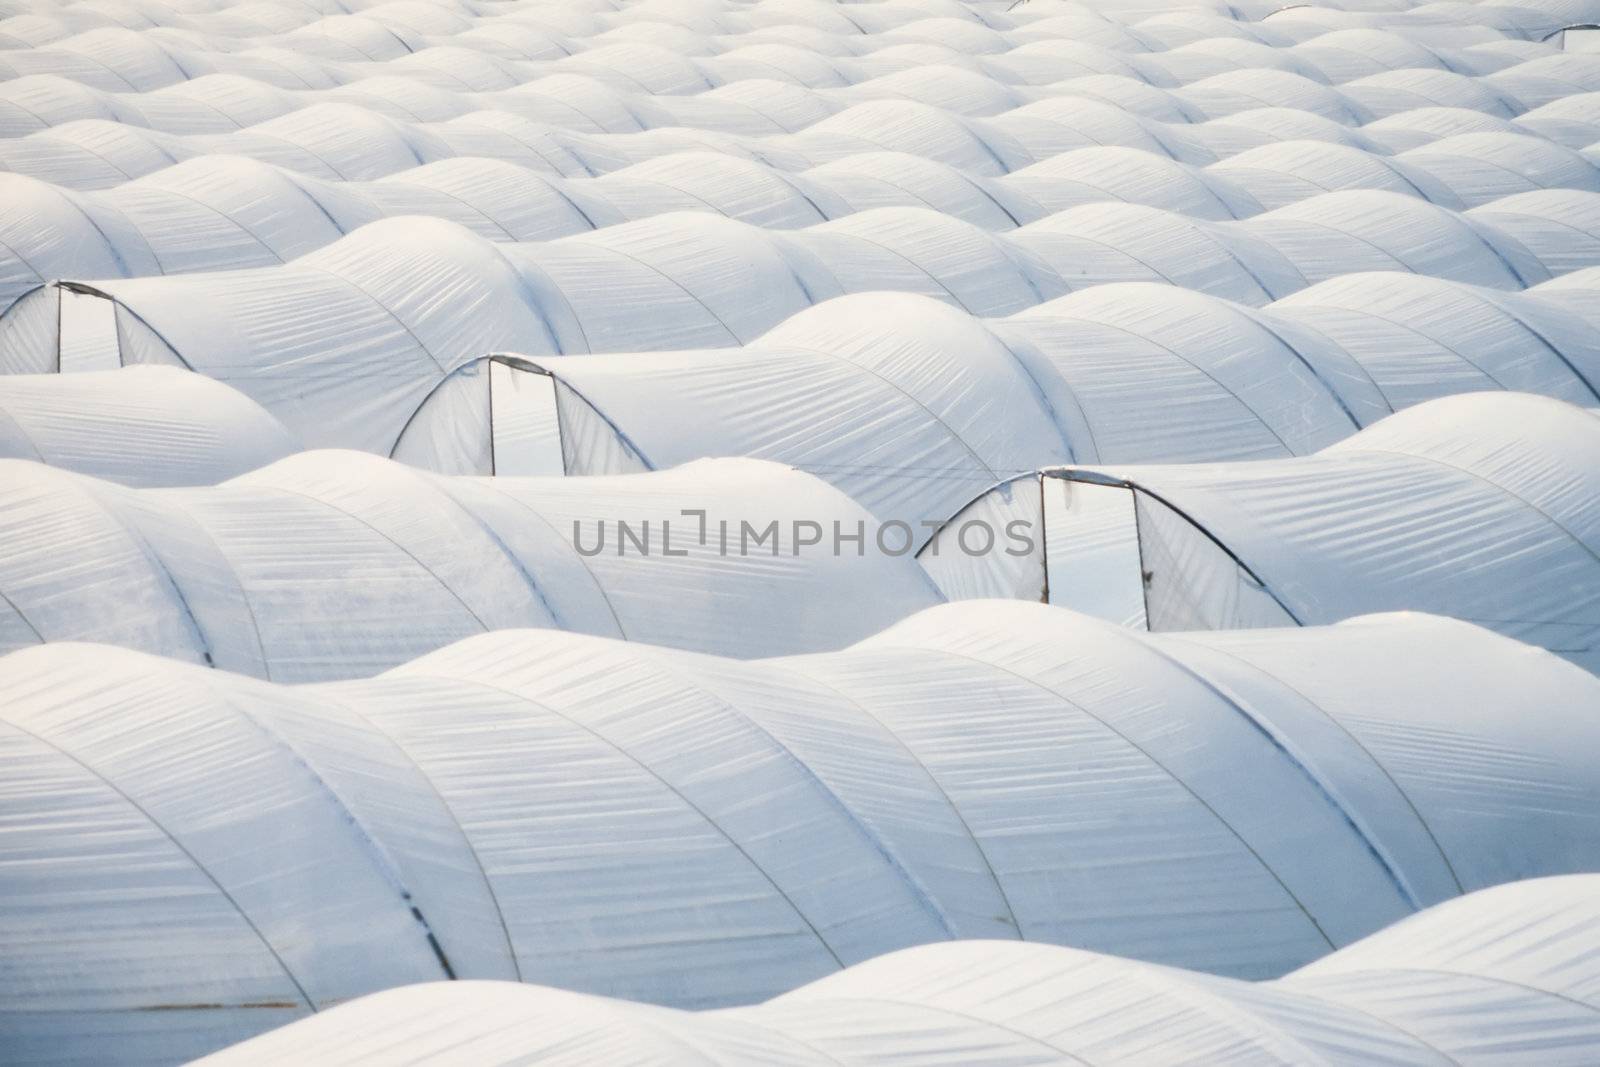 Pattern of endless sea of plastic horticulture greenhouse tunnels for intensive farming of vegetables.